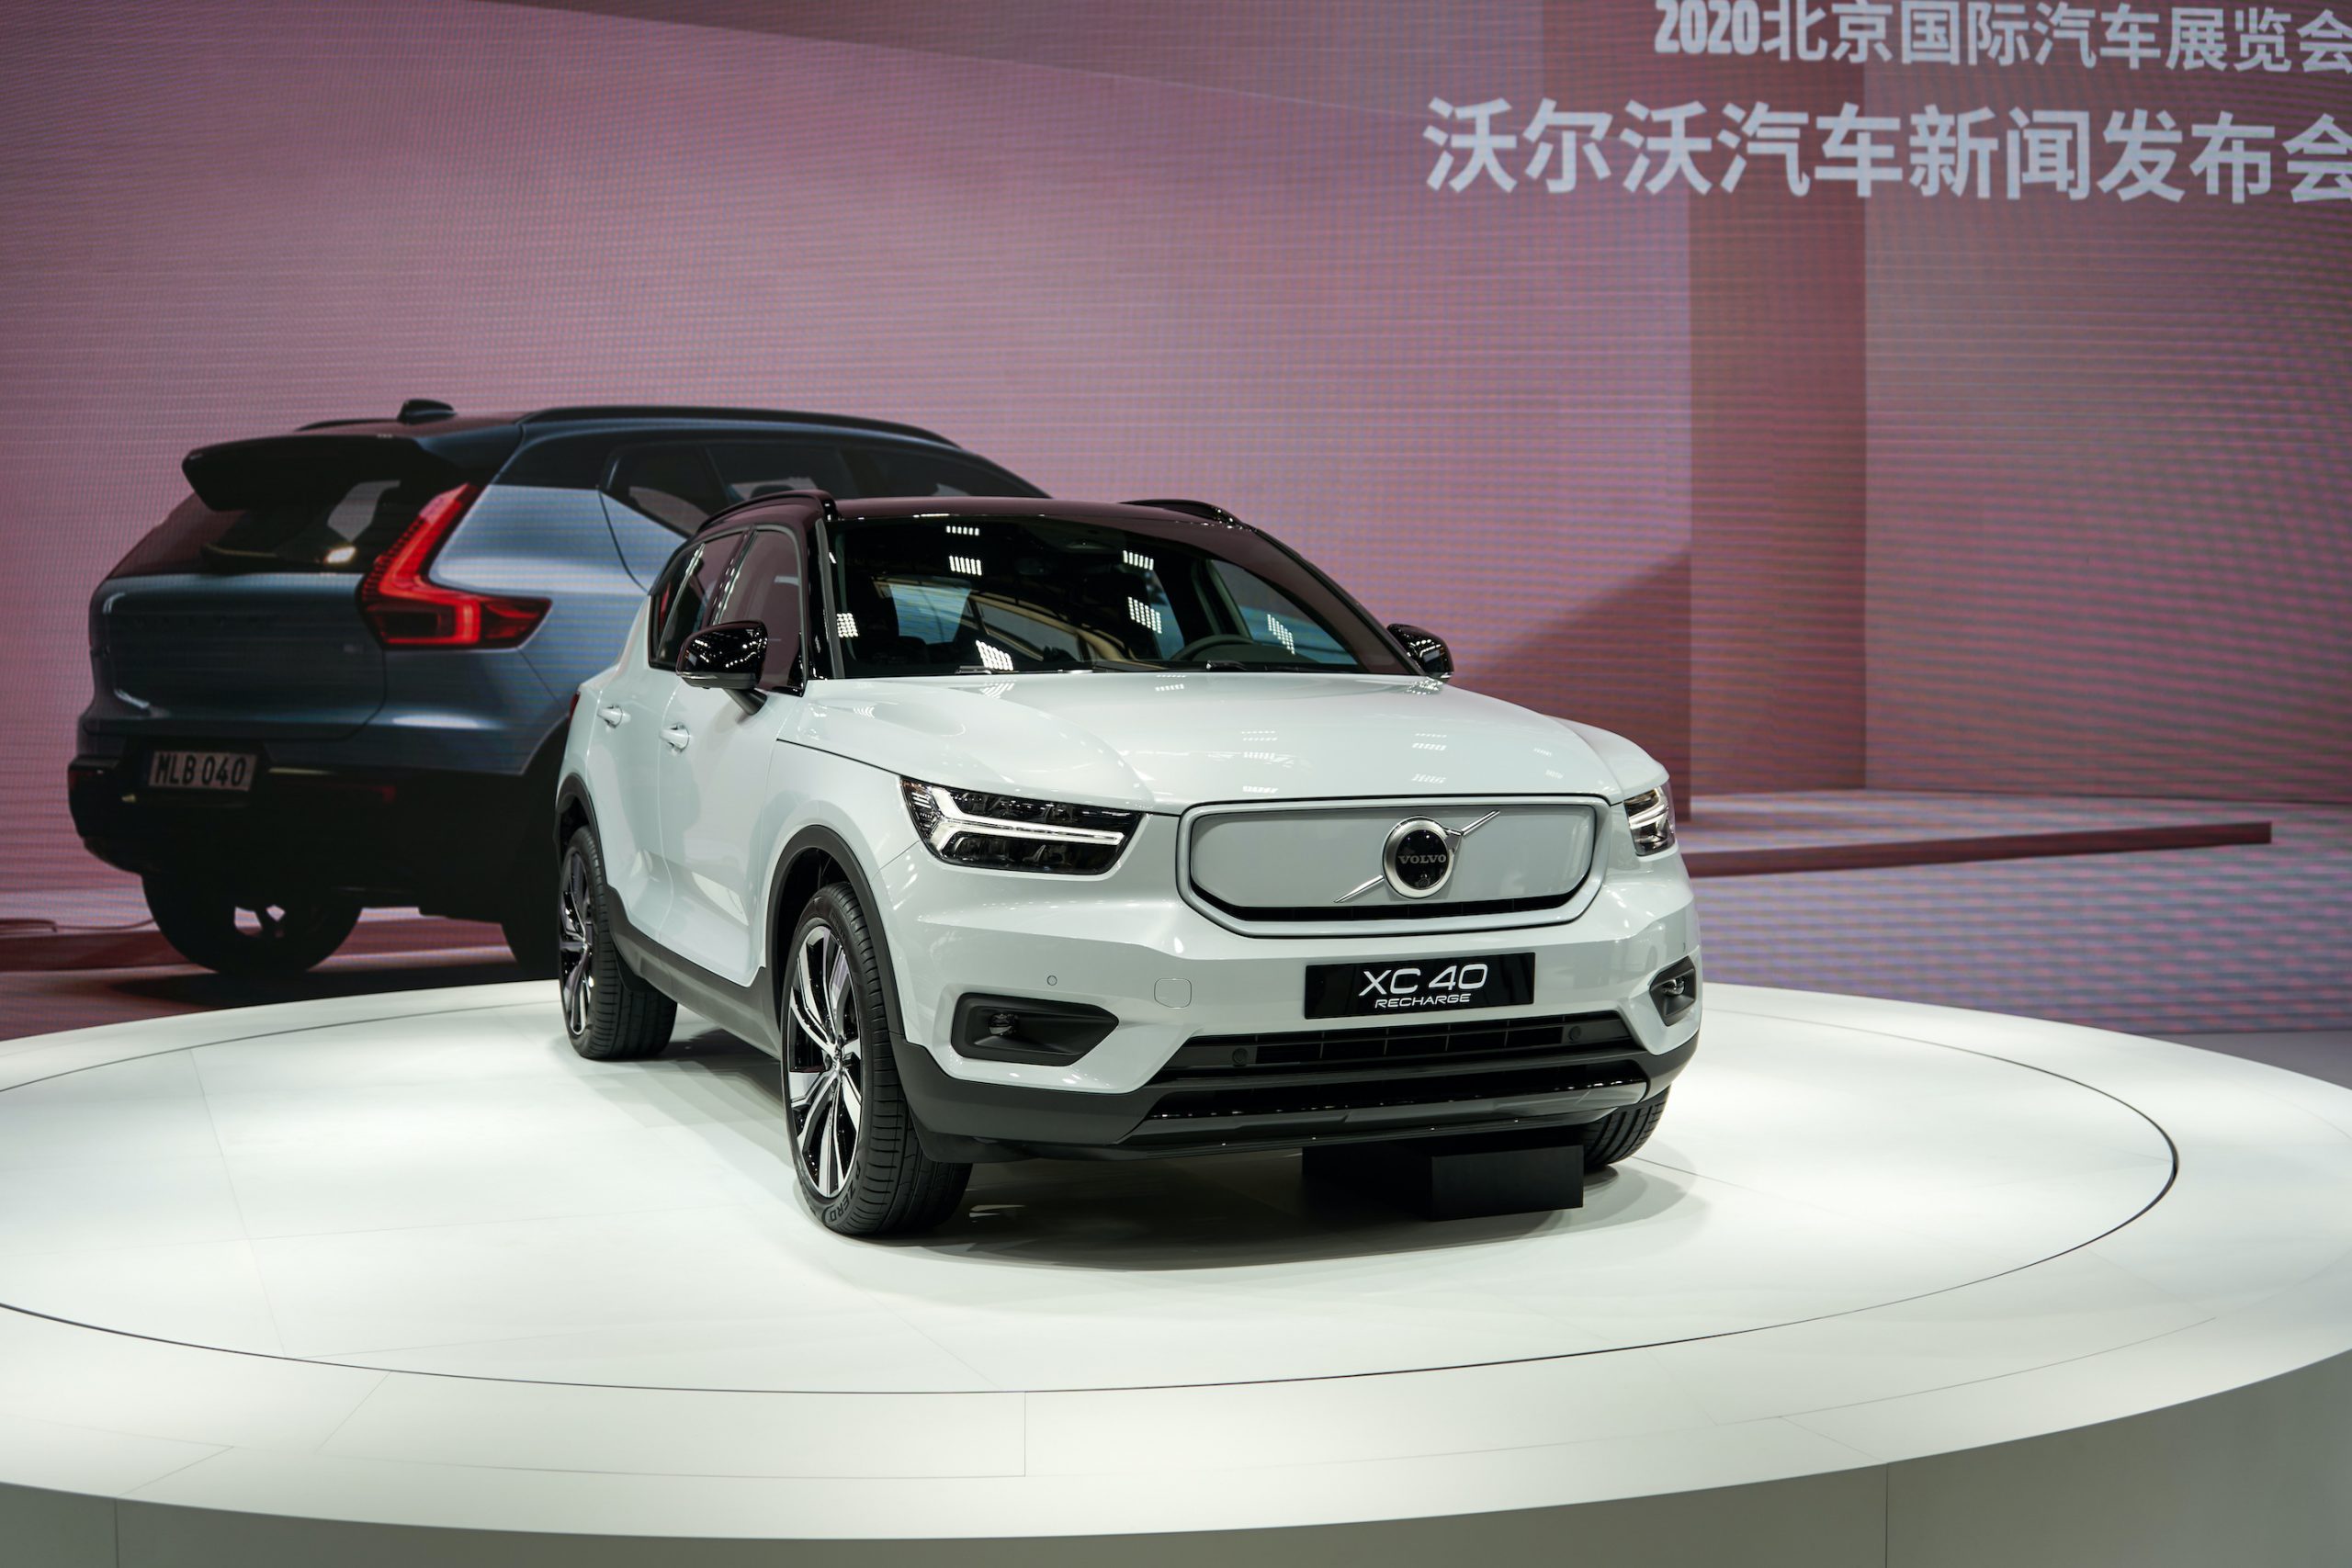 Volvo XC40 Recharge P8 Electric vehicle at Beijing International Auto Show